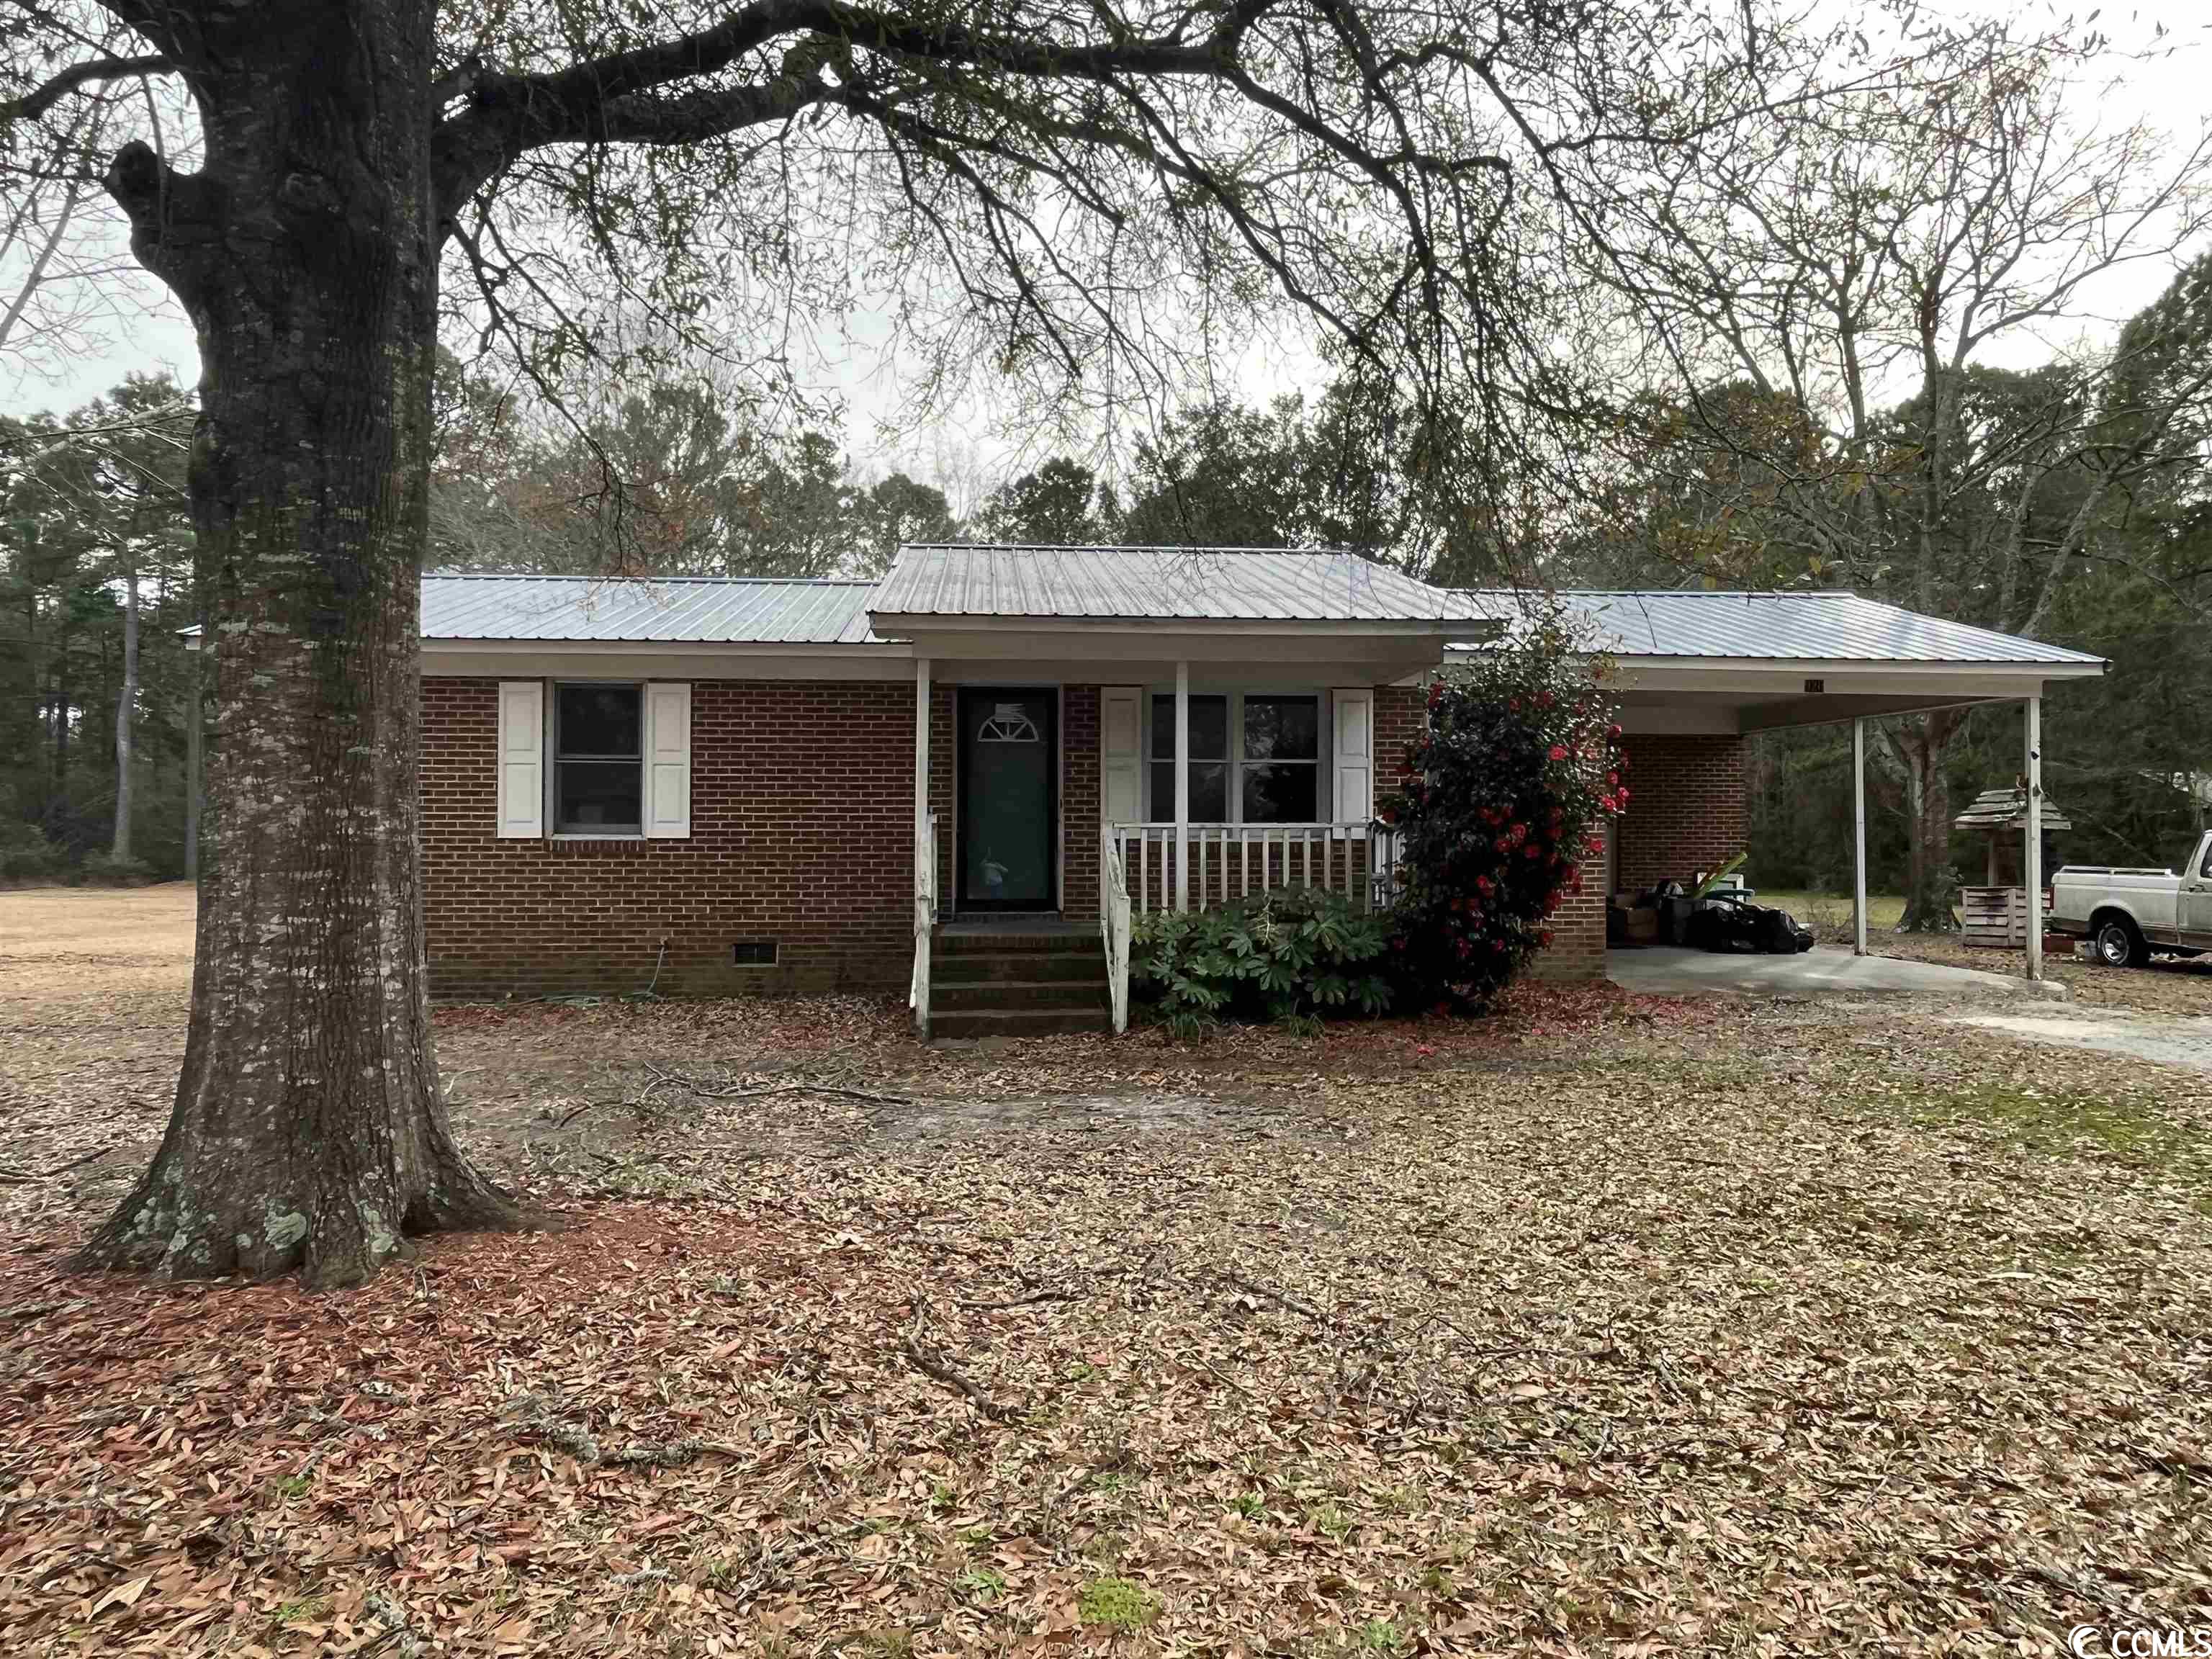 back on the market through no fault of the seller.  looking for location near the beach with no hoa? this 2 bedroom 1 bath is the perfect fit for someone looking to be within a short driving distance to the grand strand (+/-10 miles) or downtown conway (+/-6 miles) and the convenience of being just off highway 544 on a dead end road. property is in close proximity to coastal carolina university and horry-georgetown technical college as well (+/-3 miles). nice back and side yard with attached and detached storage.